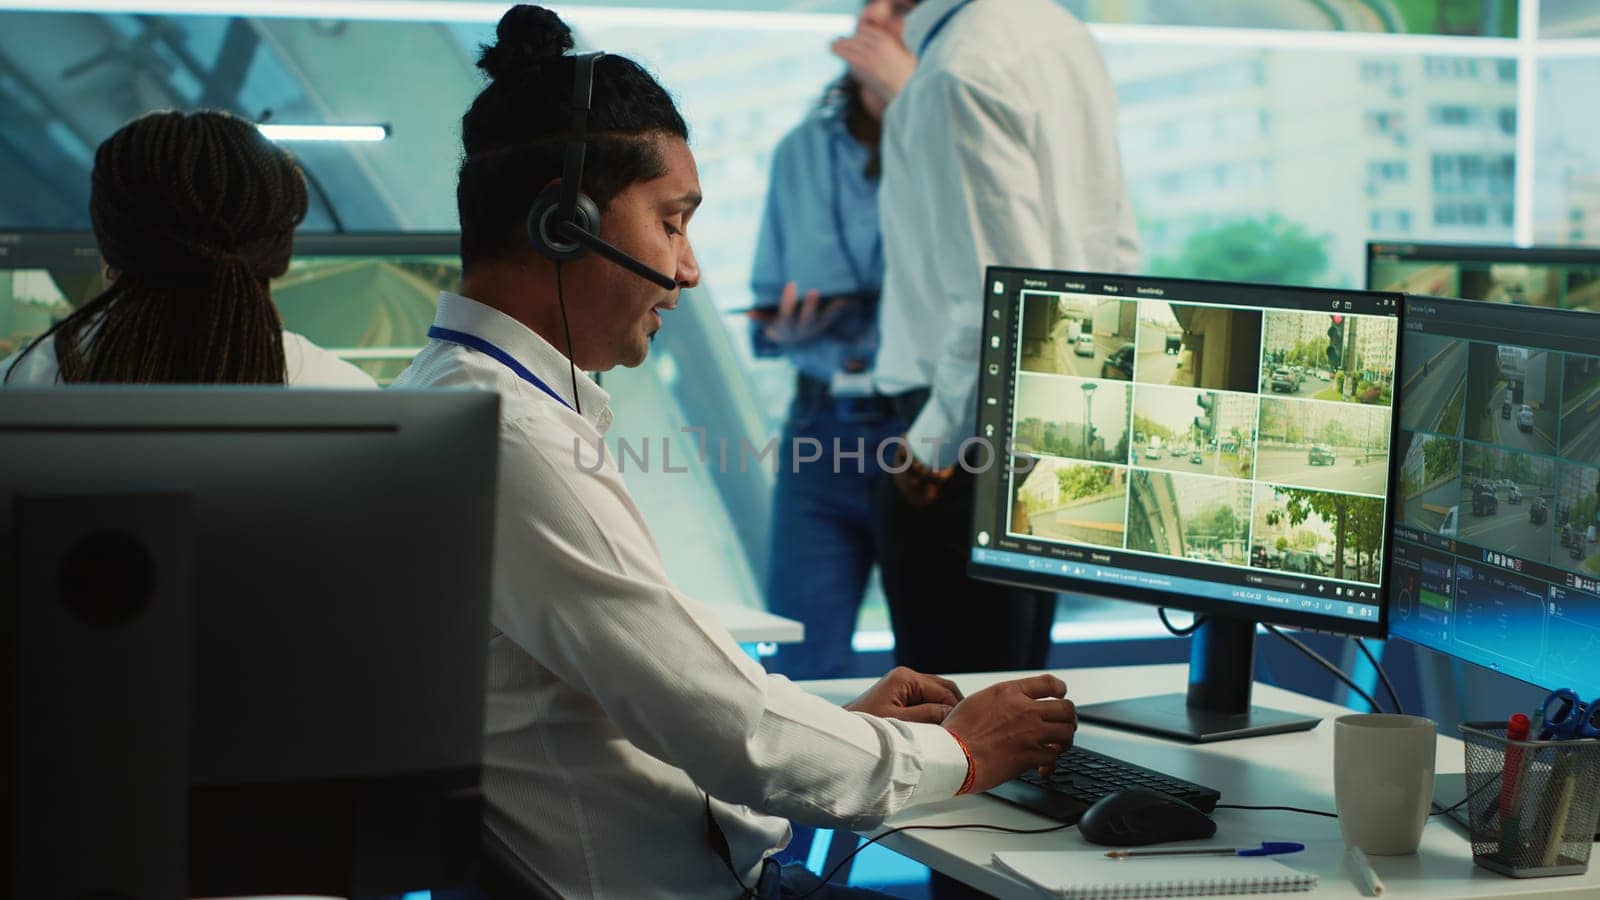 Indian employee communicating satellite map directions in observation room, monitoring traffic around the city via CCTV security system. Young man works with video surveillance data. Camera A.